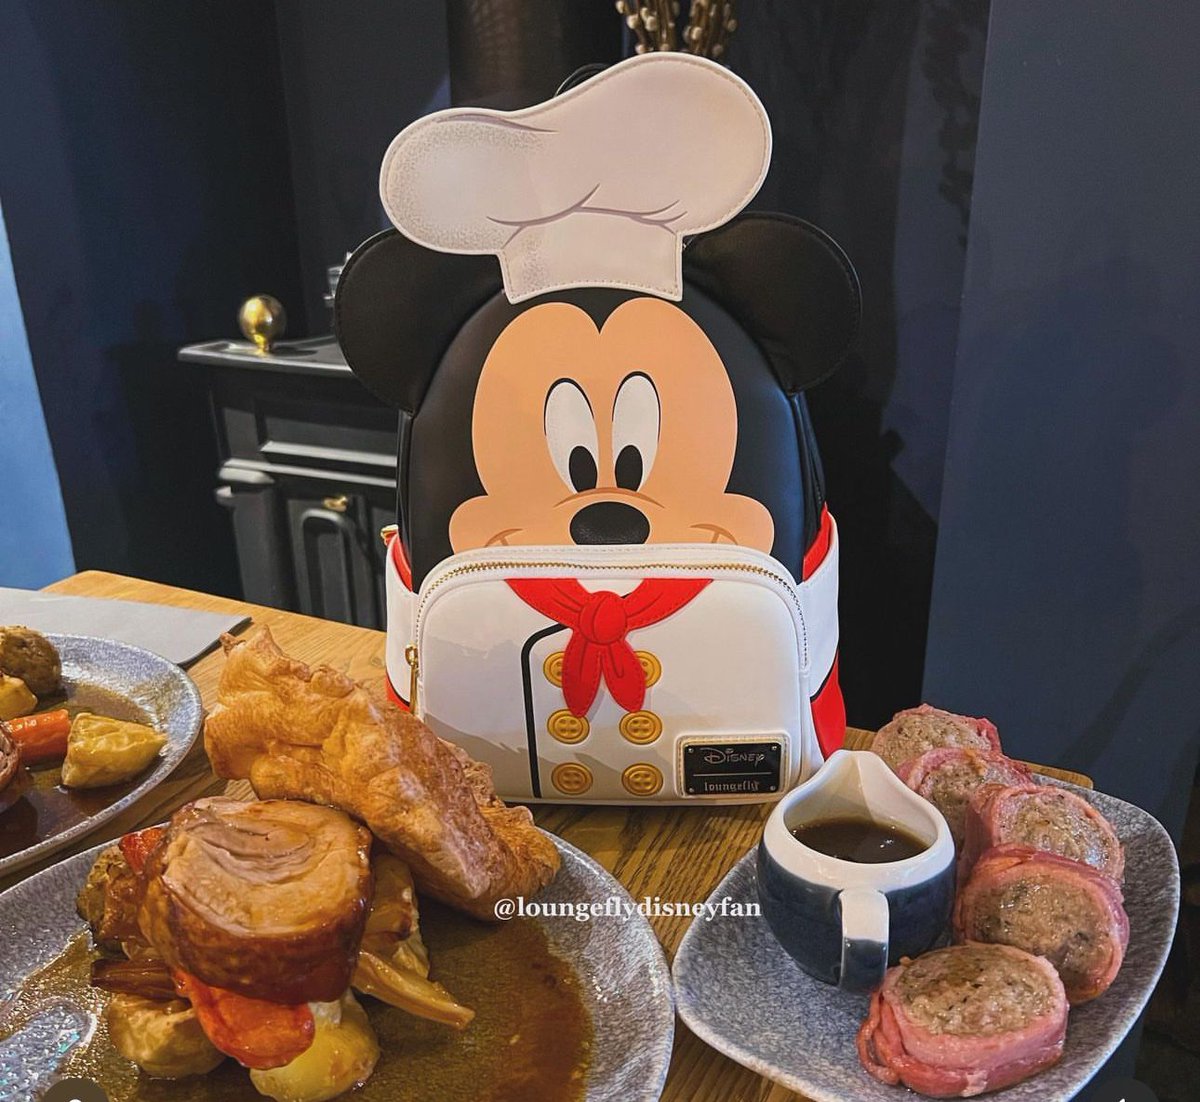 How will you be spending your bank holiday Sunday? 

Be like chef Mickey and treat yourself to a delicious Sunday Roast with all the trimmings 😍

📸 - @loungeflydisneyfan

#sundayroast #bankholiday #hungry #tenterden